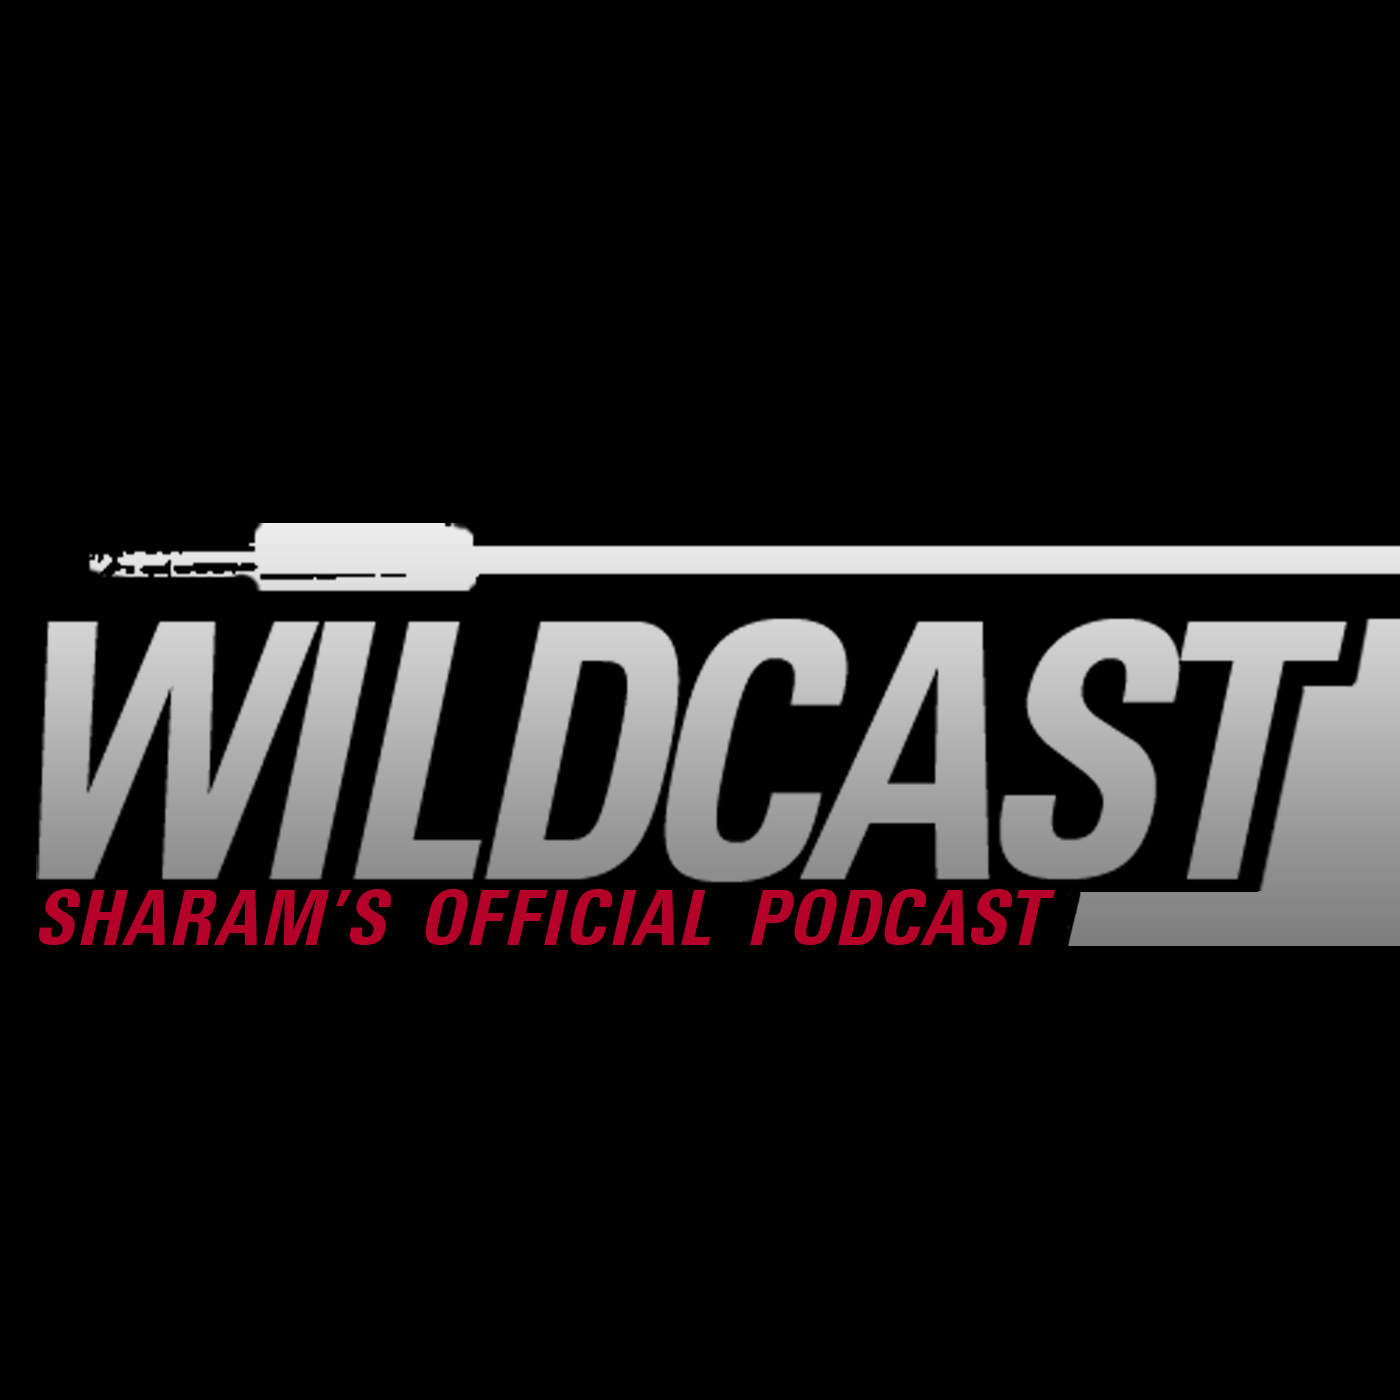 WILDCAST EPISODE 39 - Sharam's Official Podcast